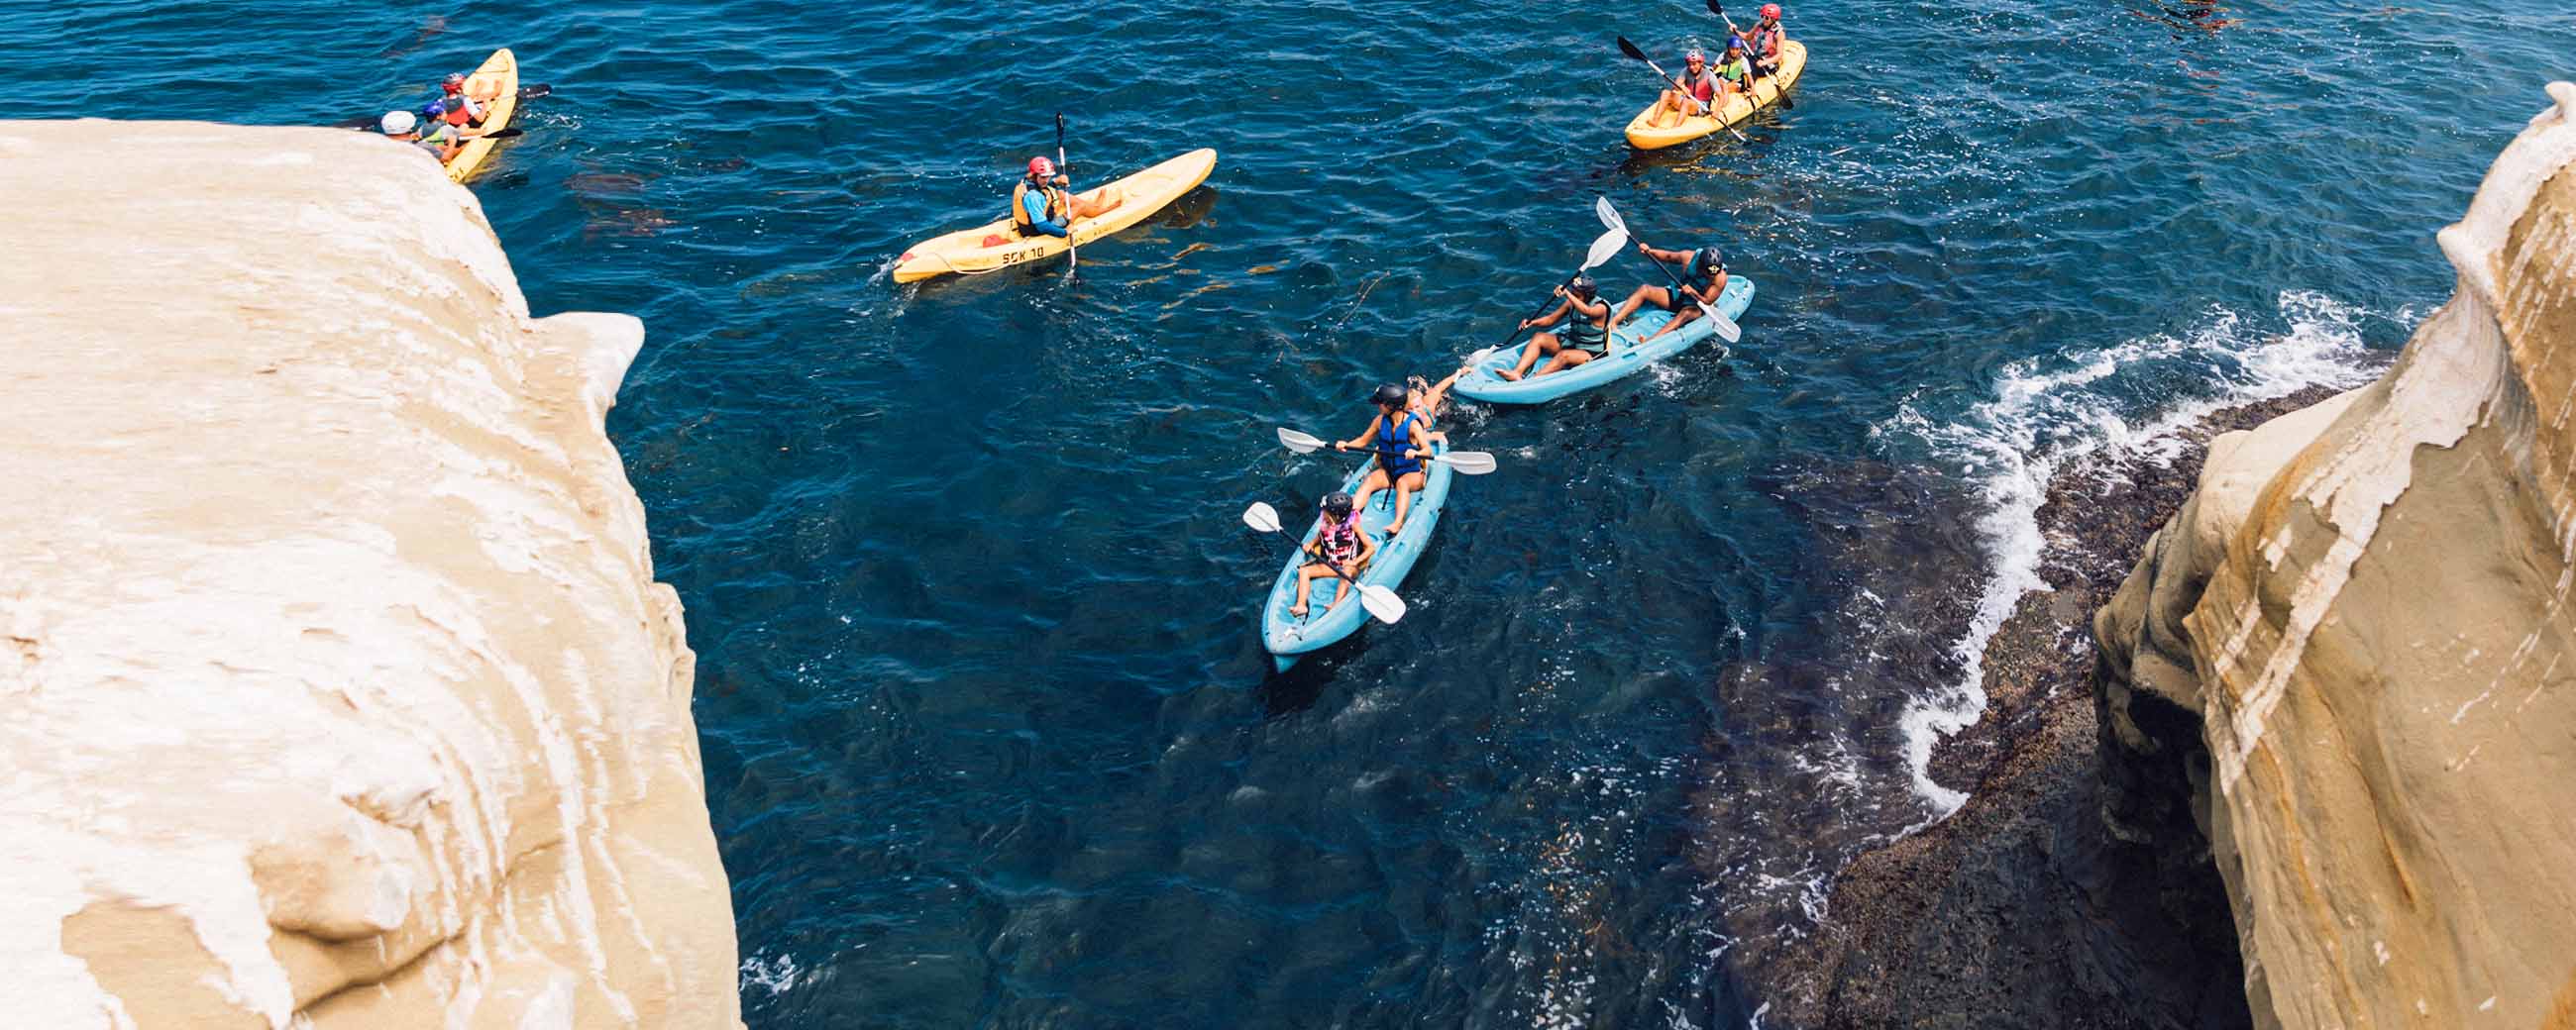 Five groups of kayakers paddling into one of the Seven Sea Caves in La Jolla with the company Everyday California.